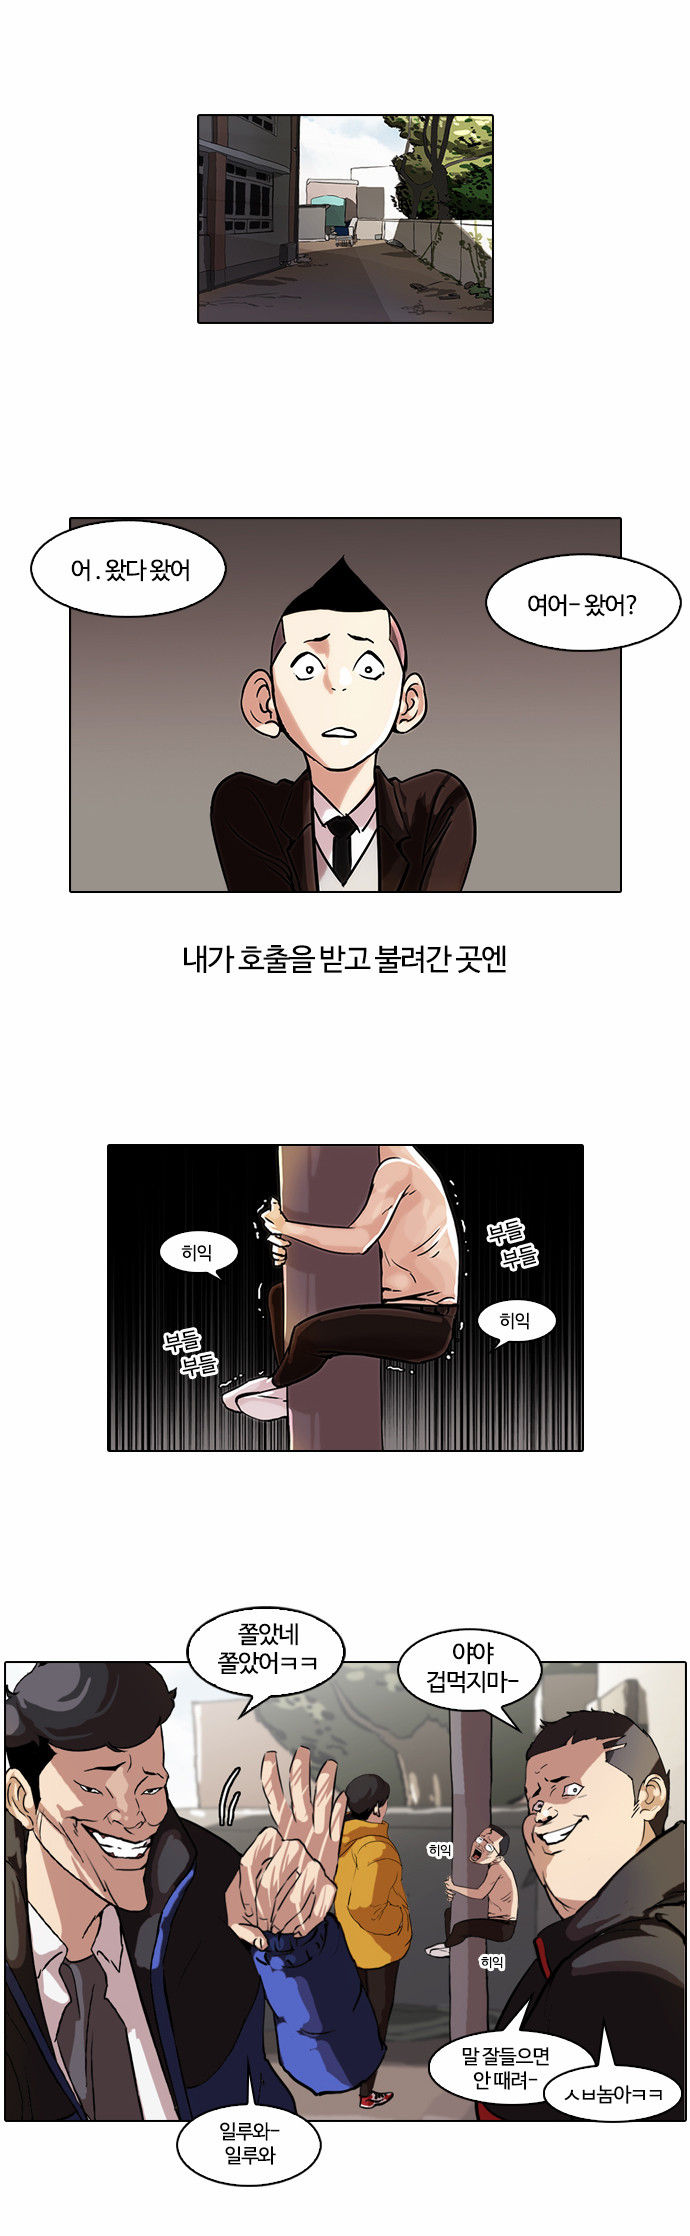 Lookism - Chapter 53 - Page 1